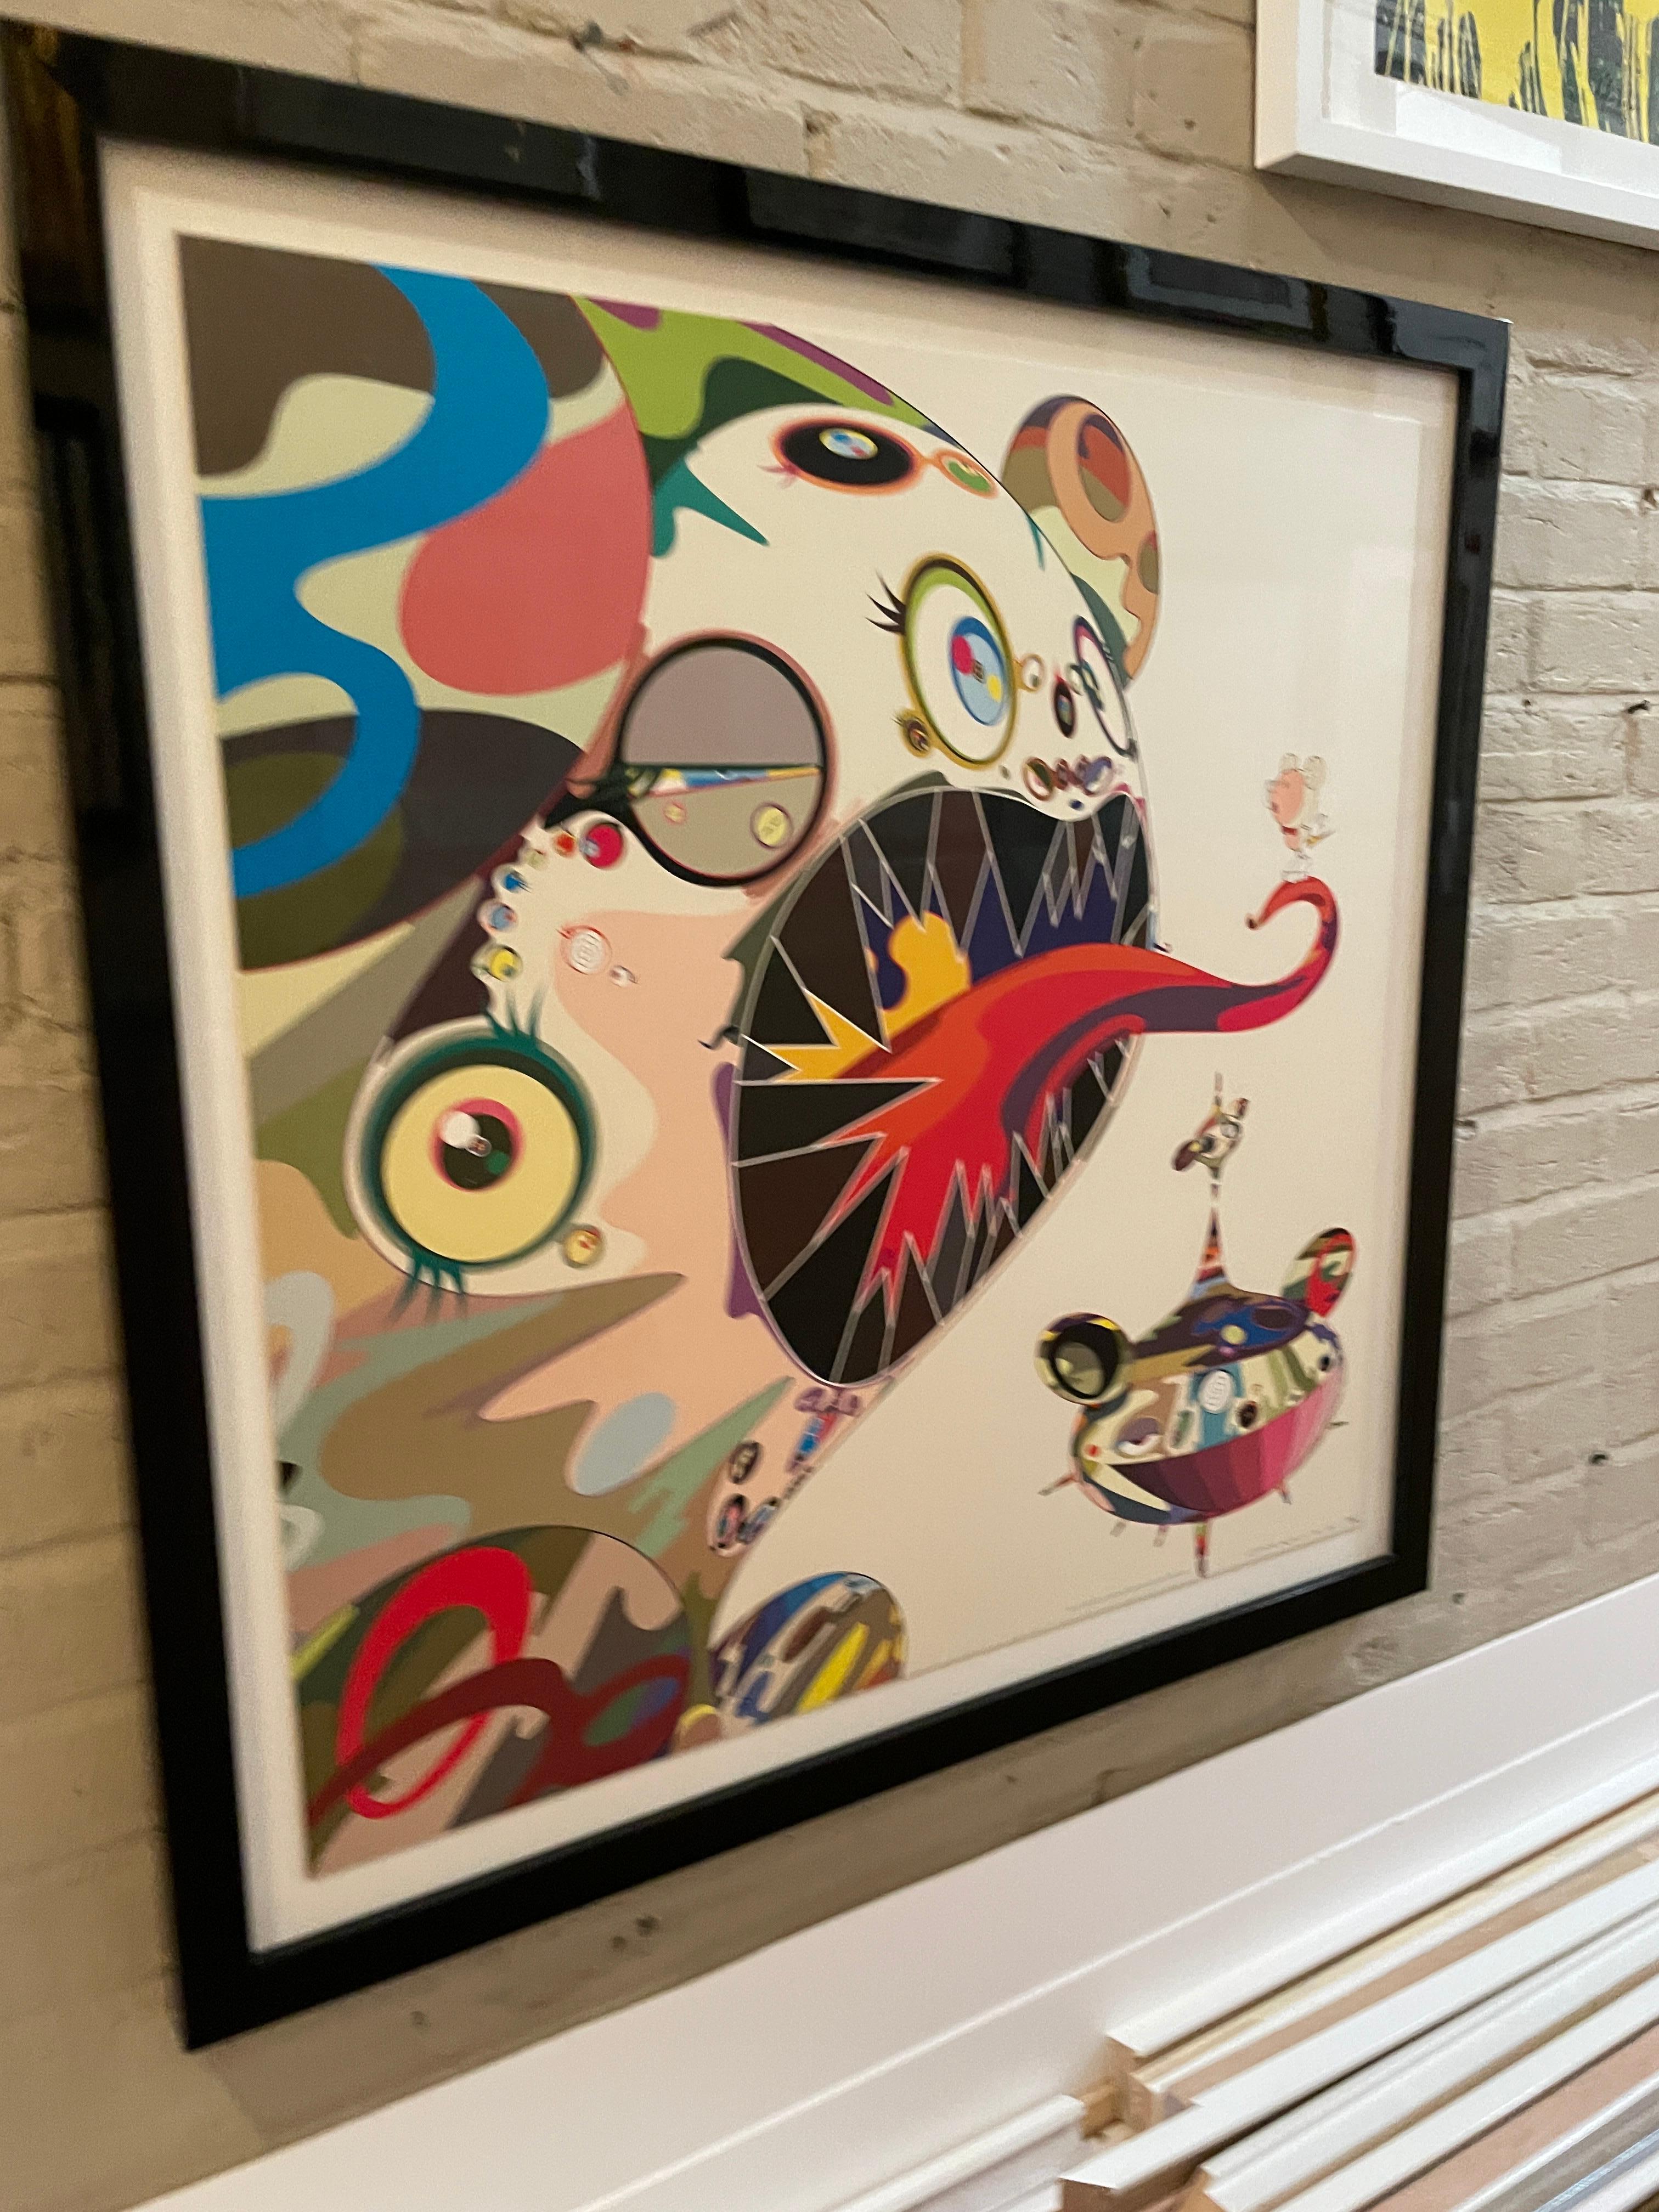 Artist: Takashi Murakami
Medium: Lithograph
Title: Homage to Francis Bacon (Study of George Dyer)
Year: 2003
Edition: 89/300
Framed Size: 31 1/2